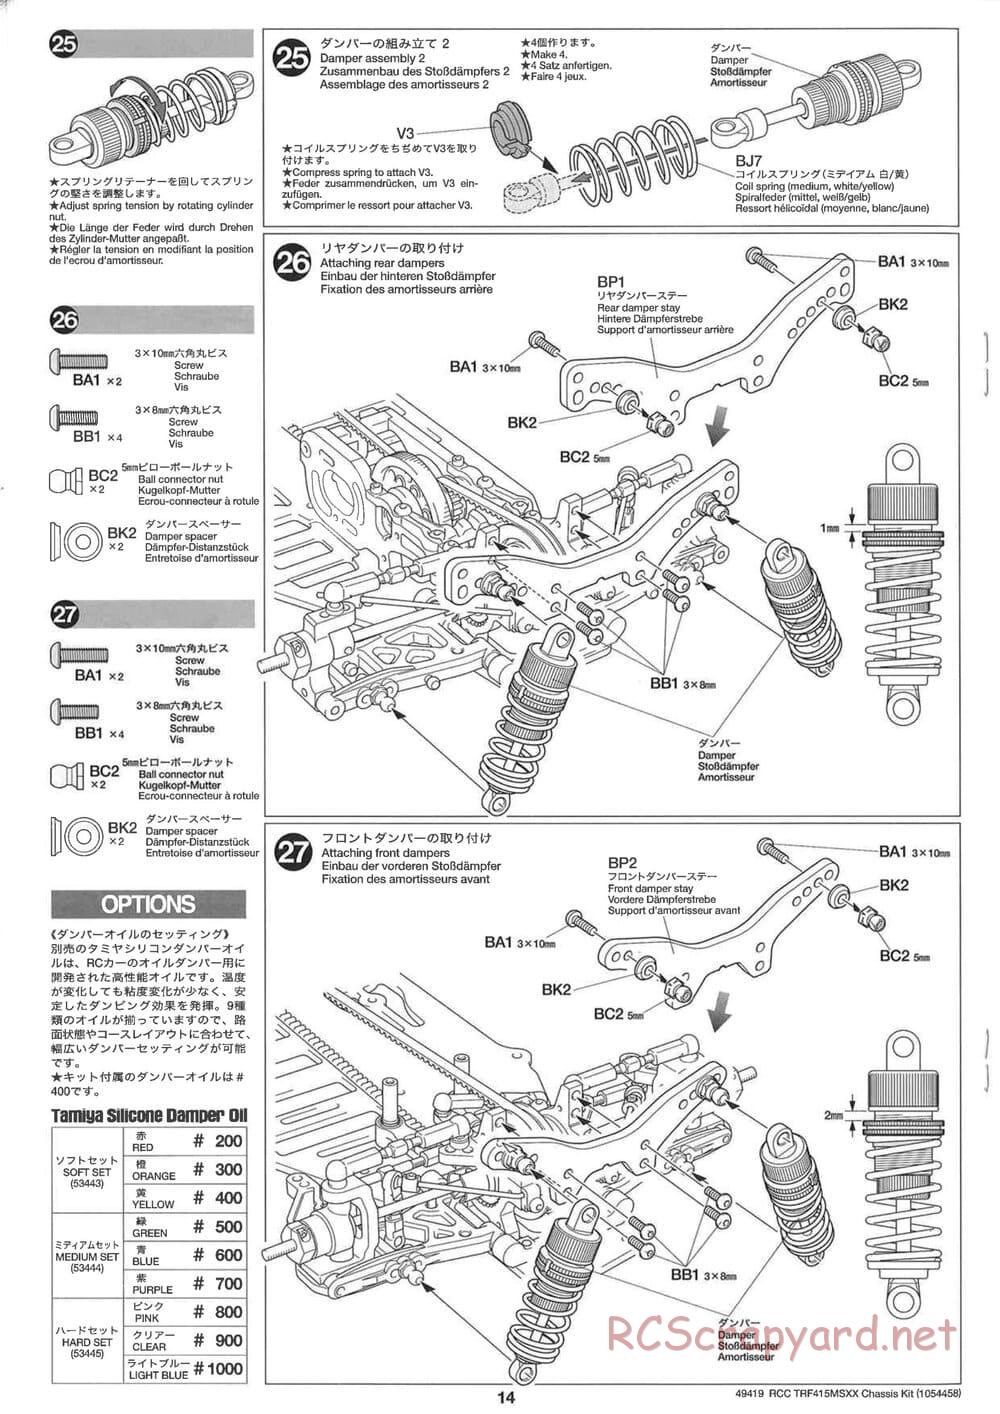 Tamiya - TRF415-MSXX Chassis - Manual - Page 14